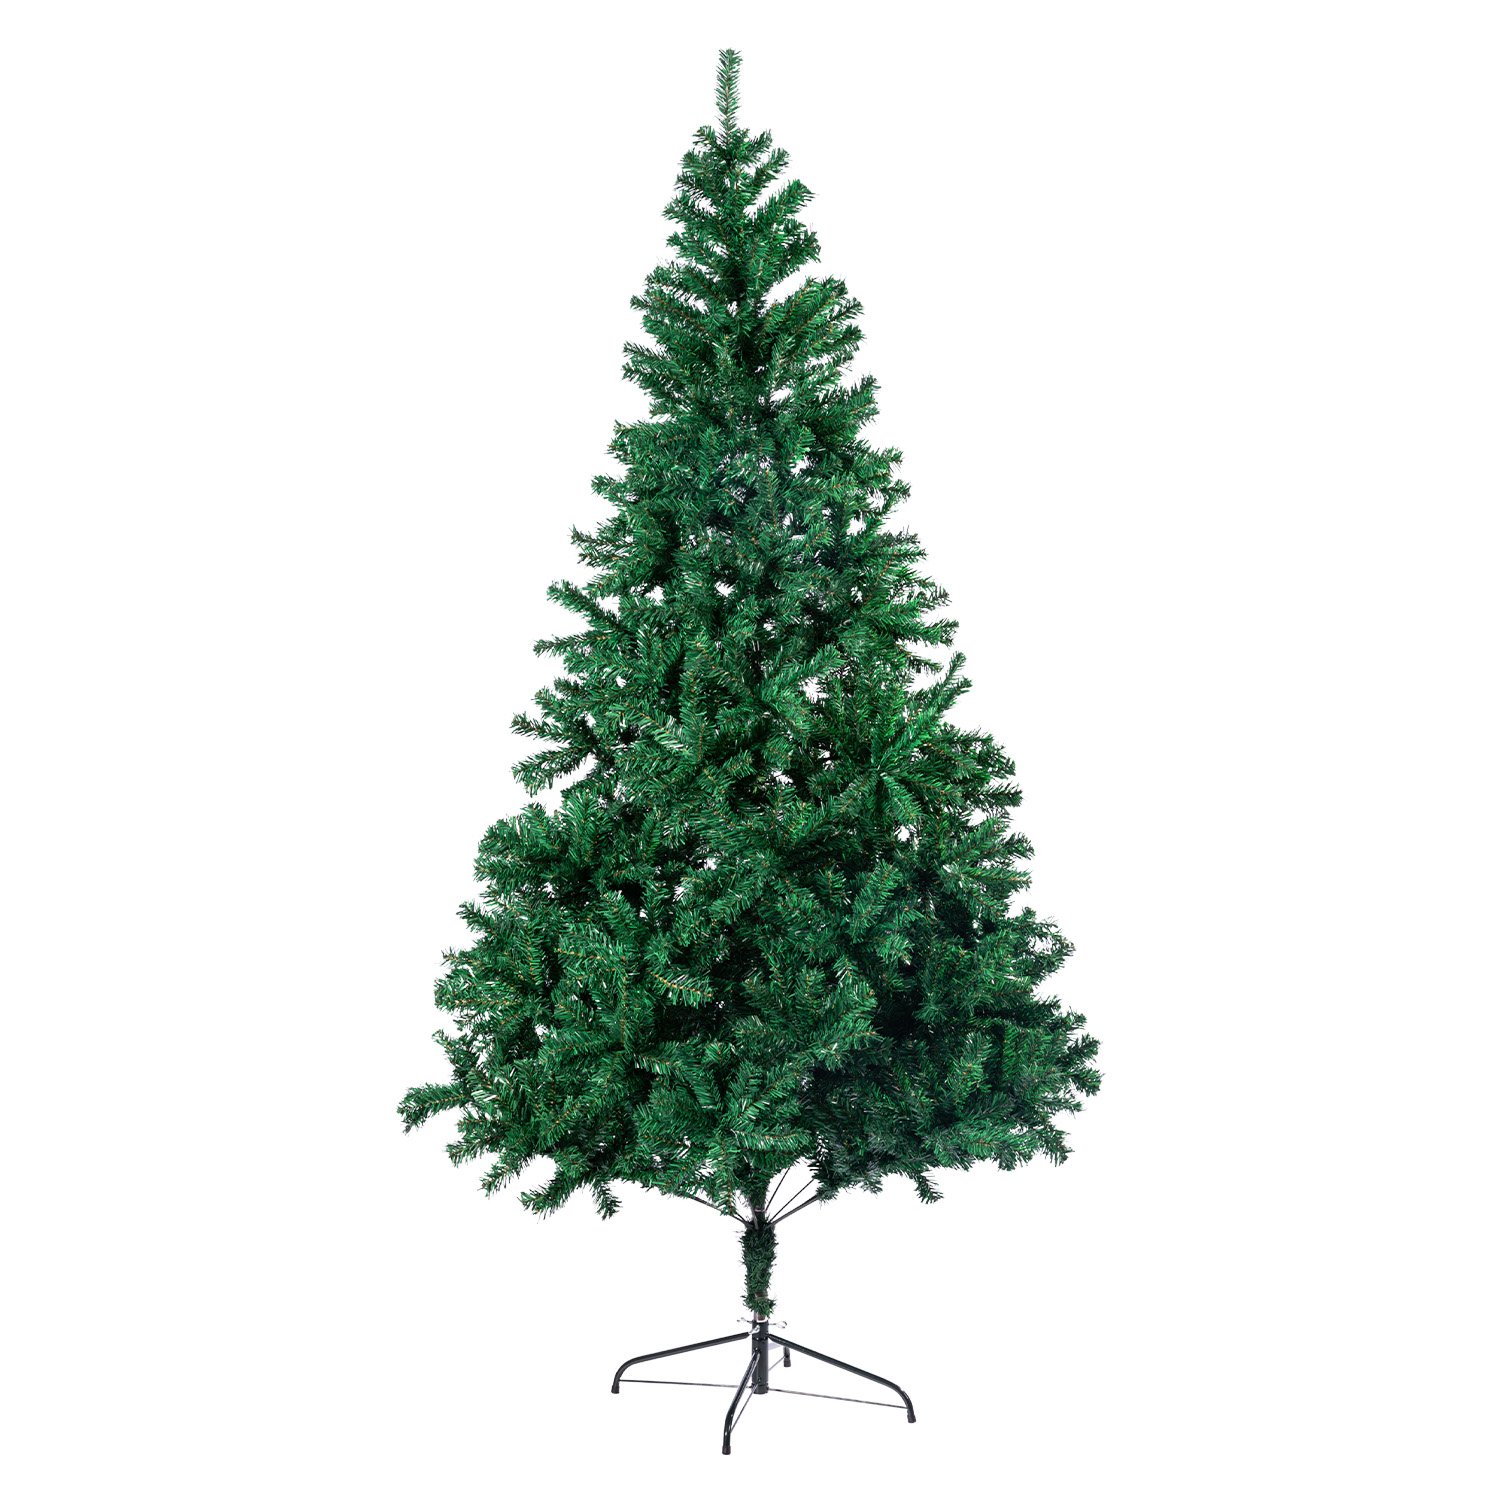 Christabelle Green Artificial Christmas Tree 1.2m - 300 Tips 1